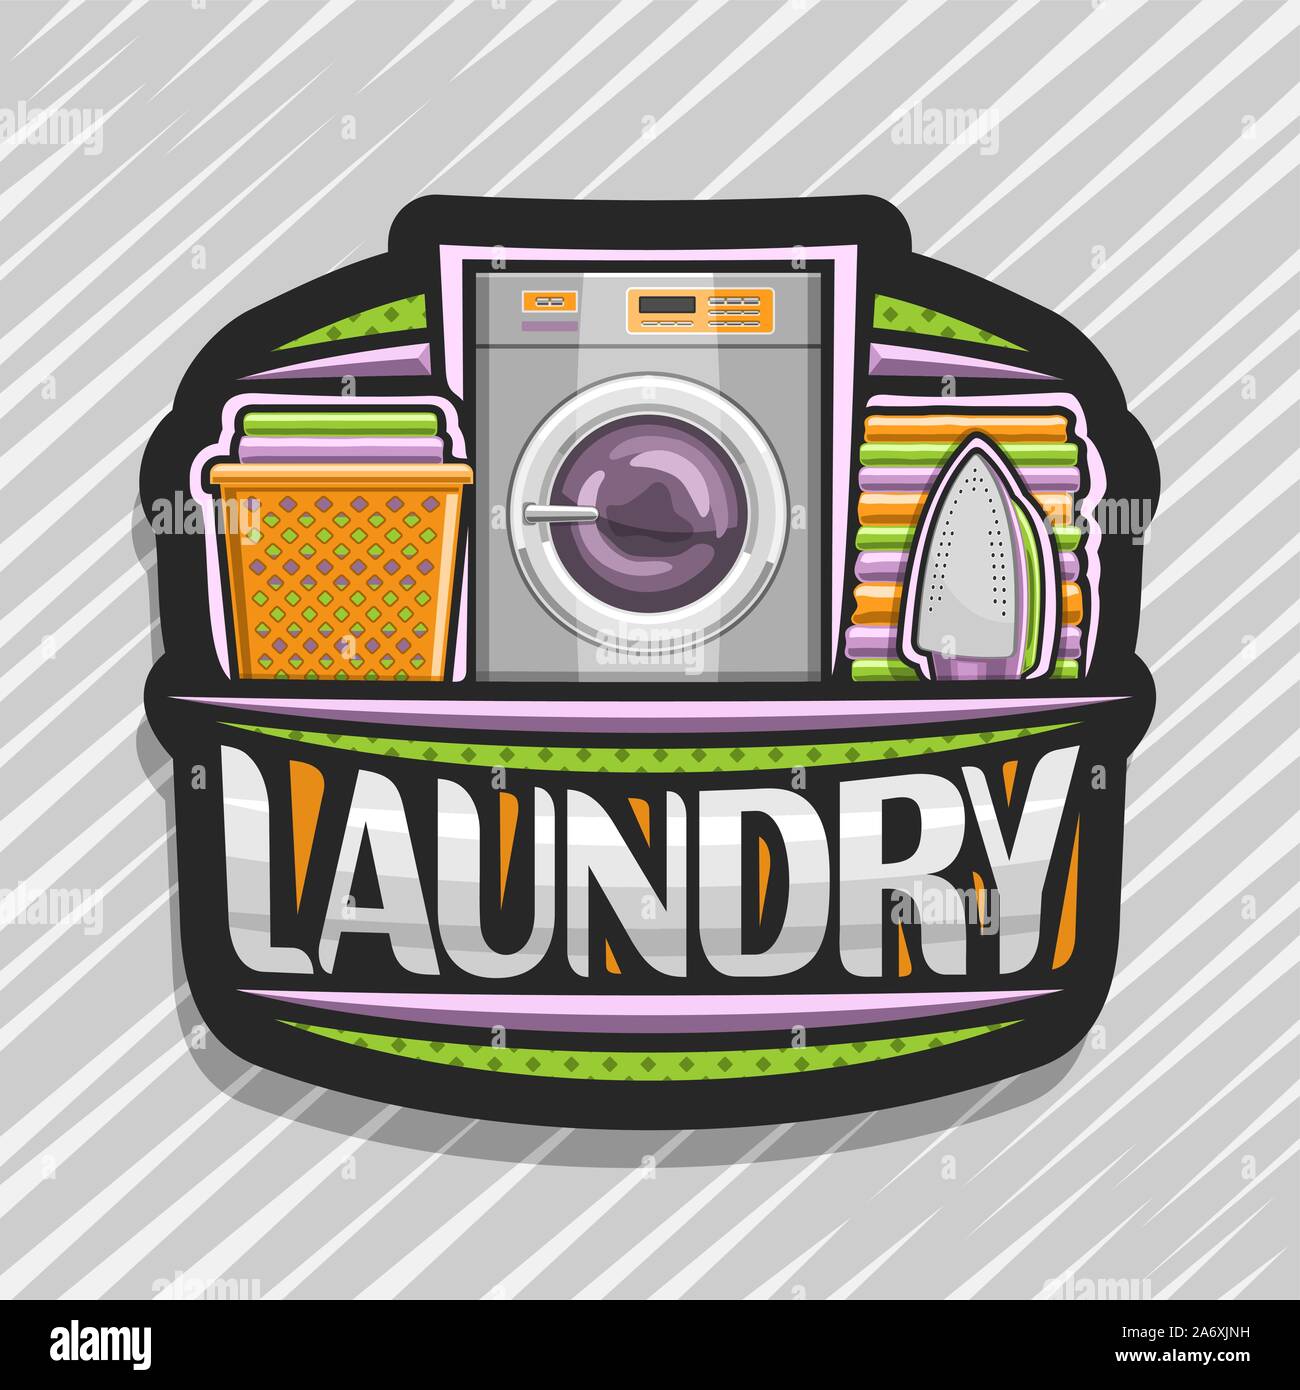 Vector logo for Laundry, black signboard with automatic washing machine, orange basket with linens, electric iron and stack of towels, original brush Stock Vector